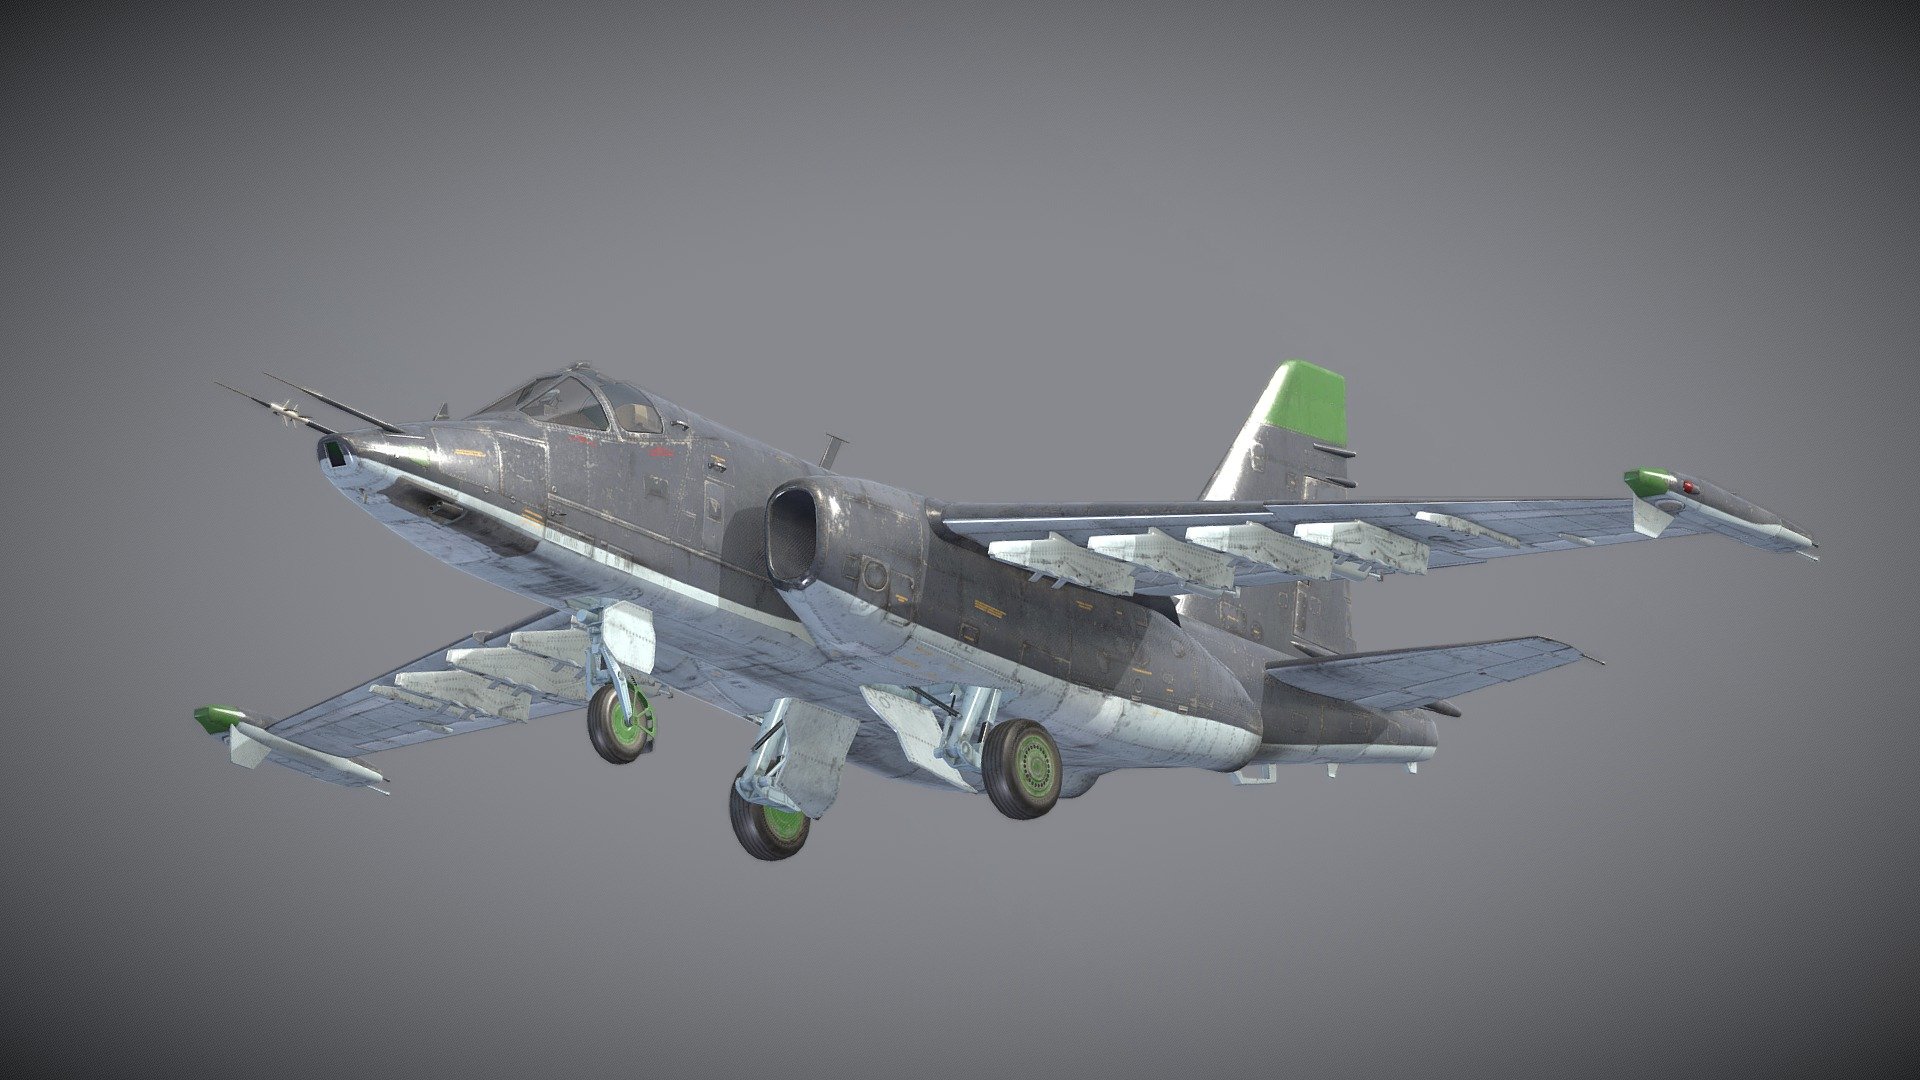 The Sukhoi Su-25 Grach (Russian: Грач (rook); NATO reporting name: Frogfoot) is a subsonic, single-seat, twin-engine jet aircraft developed in the Soviet Union by Sukhoi. It was designed to provide close air support for Soviet Ground Forces. The first prototype made its maiden flight on 22 February 1975. After testing, the aircraft went into series production in 1978 in Tbilisi in the Georgian Soviet Socialist Republic.

must enable cycles and set experimental render engine to get realistic result (For Blender) - [PBR] Sukhoi Su-25 - Download Free 3D model by Immersive3D (@Shepherds) 3d model